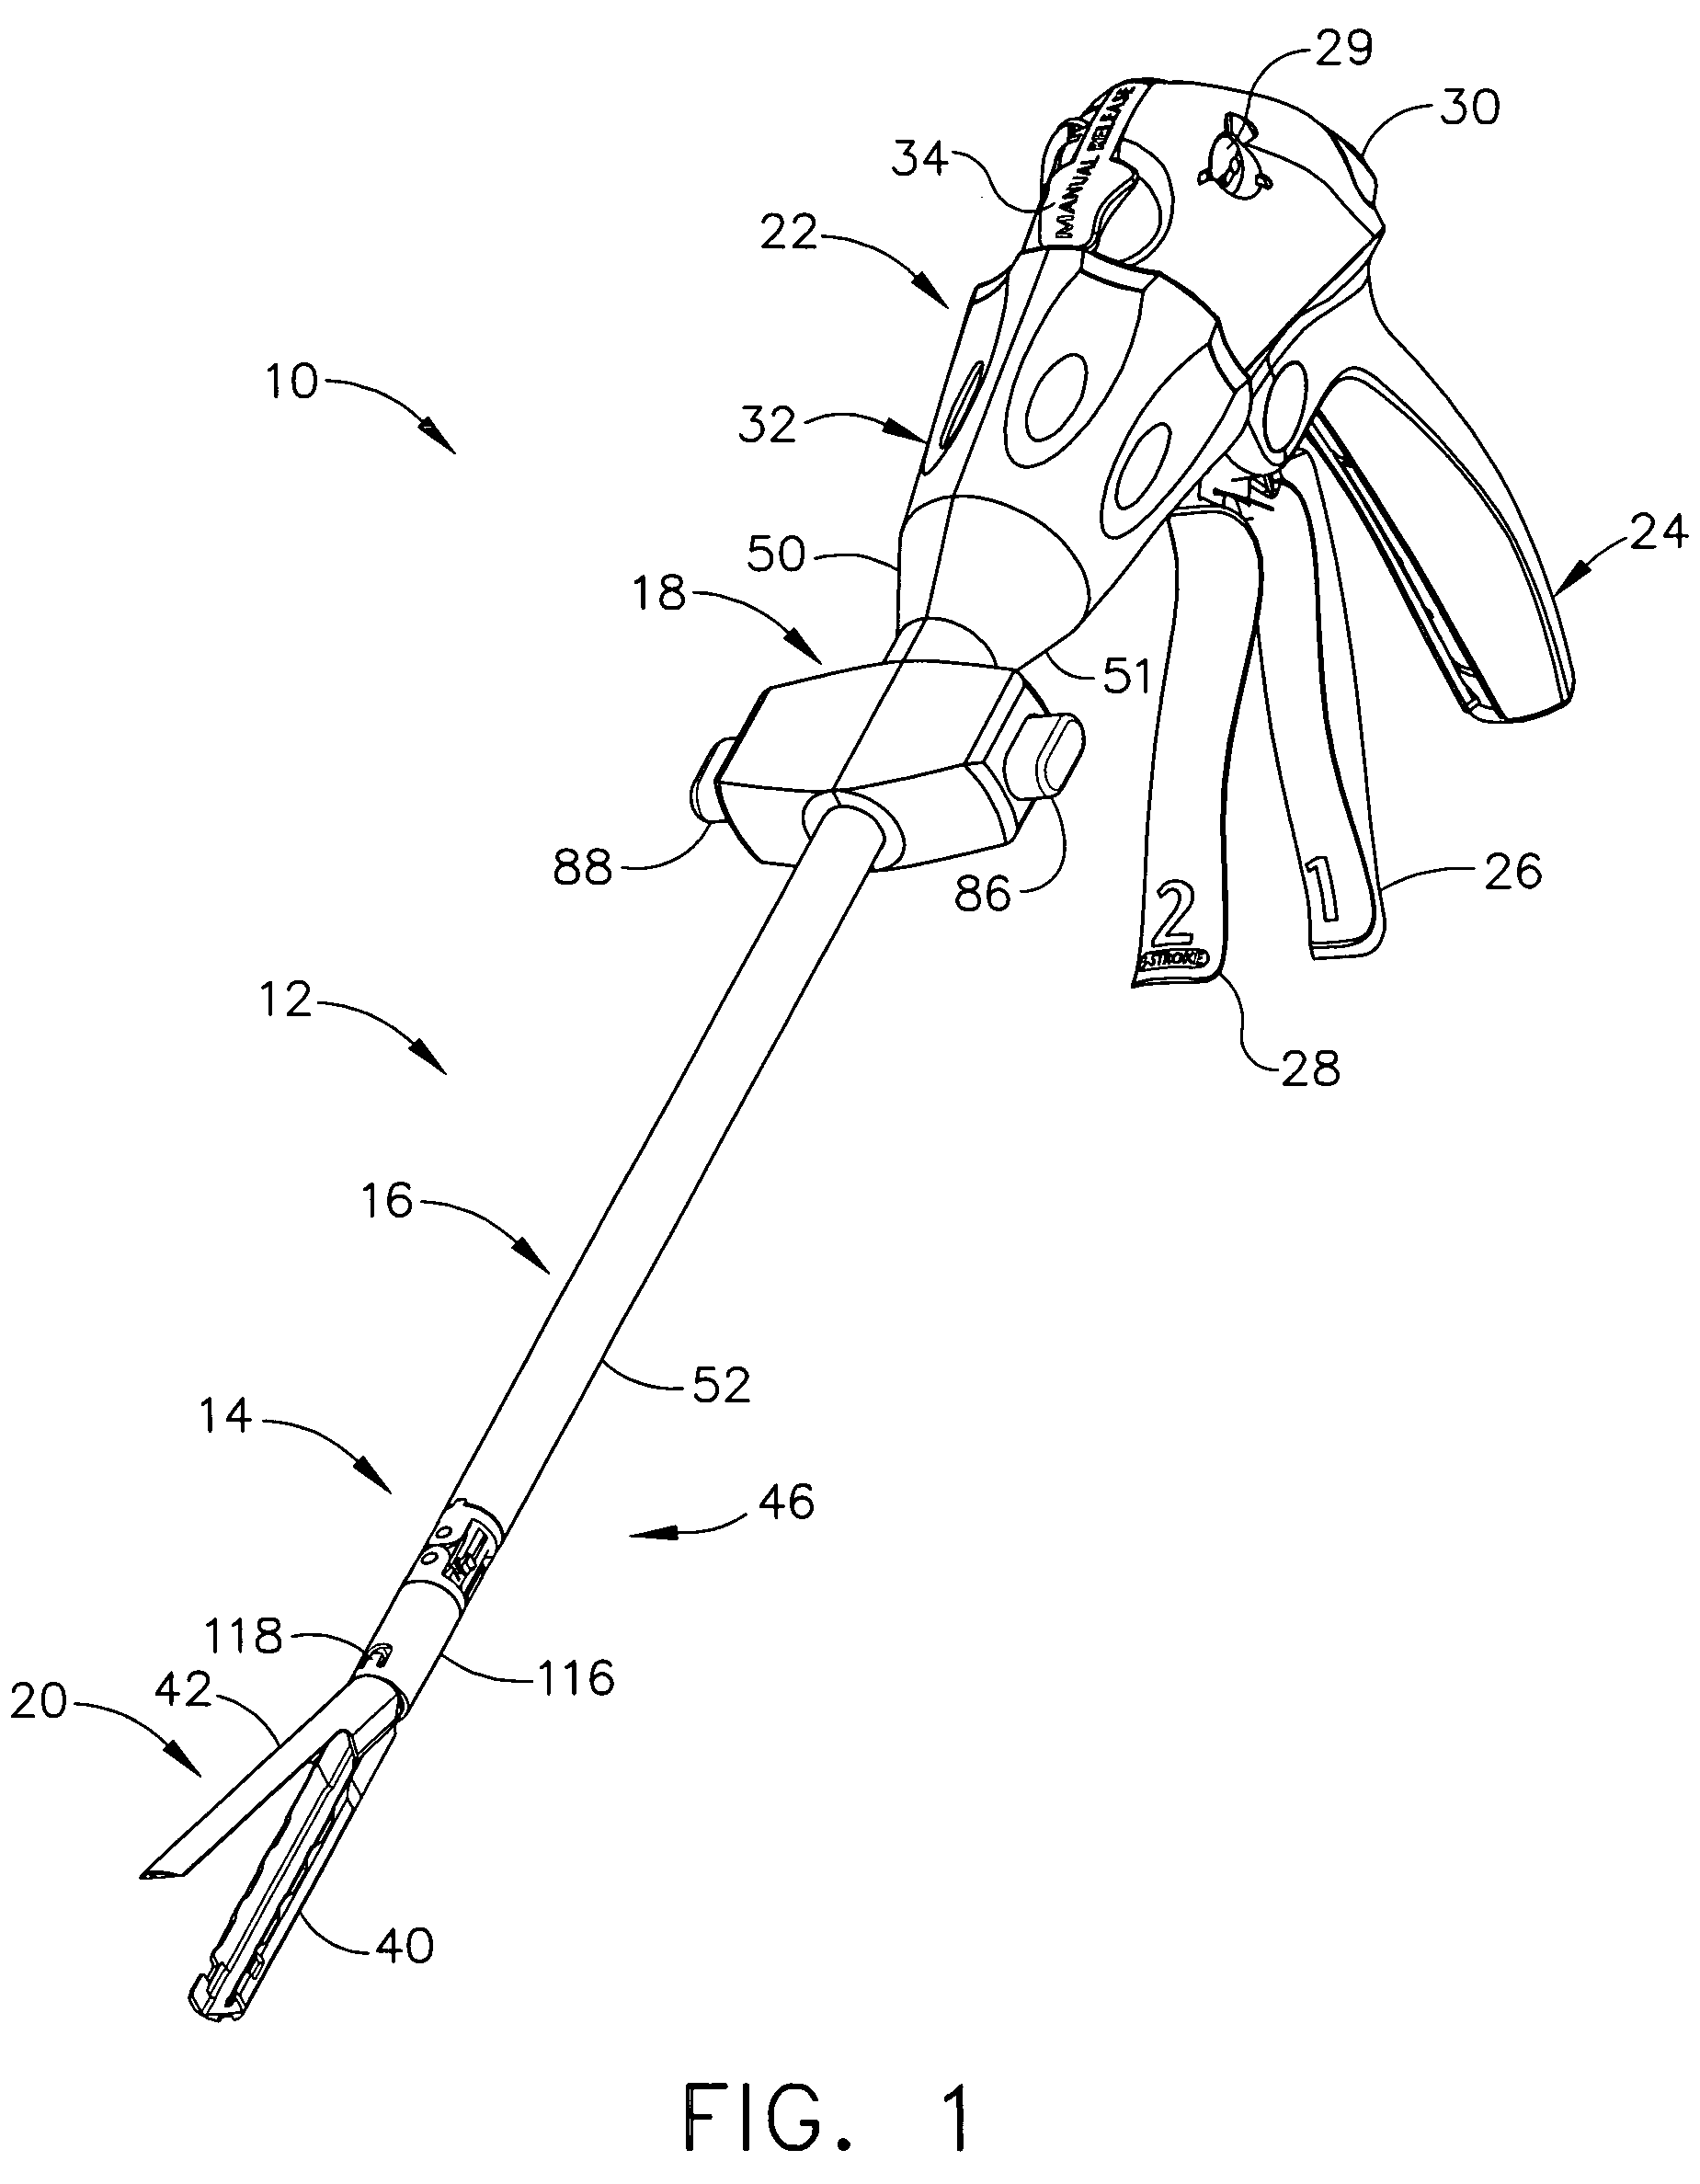 Surgical instrument with bending articulation controlled articulation pivot joint